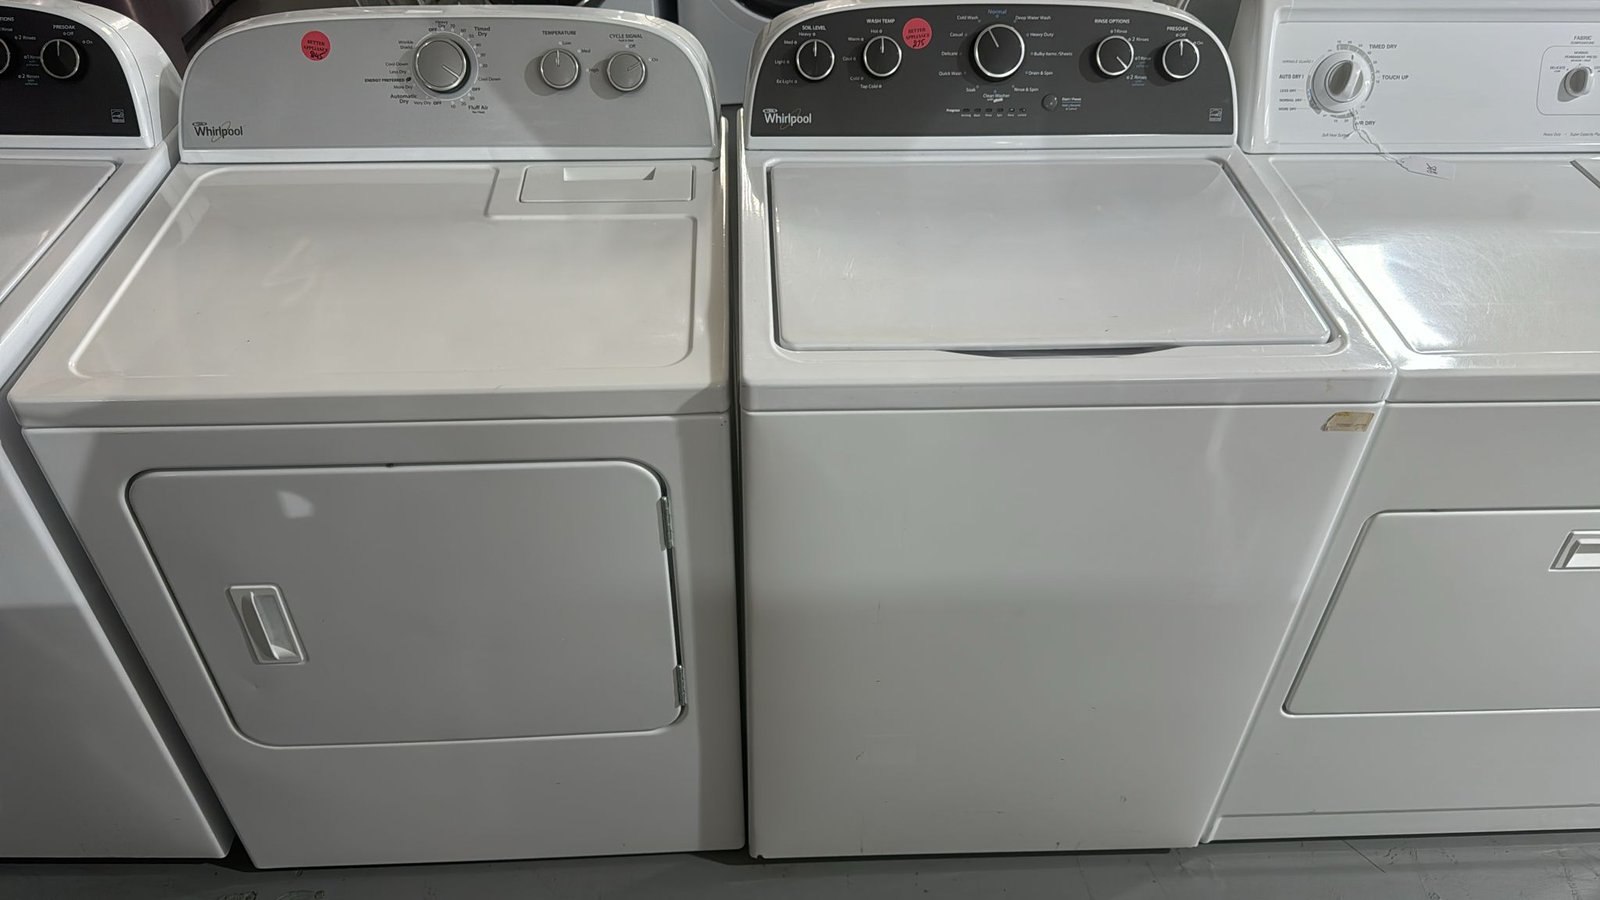 : Whirlpool Used Washer Dryer Set